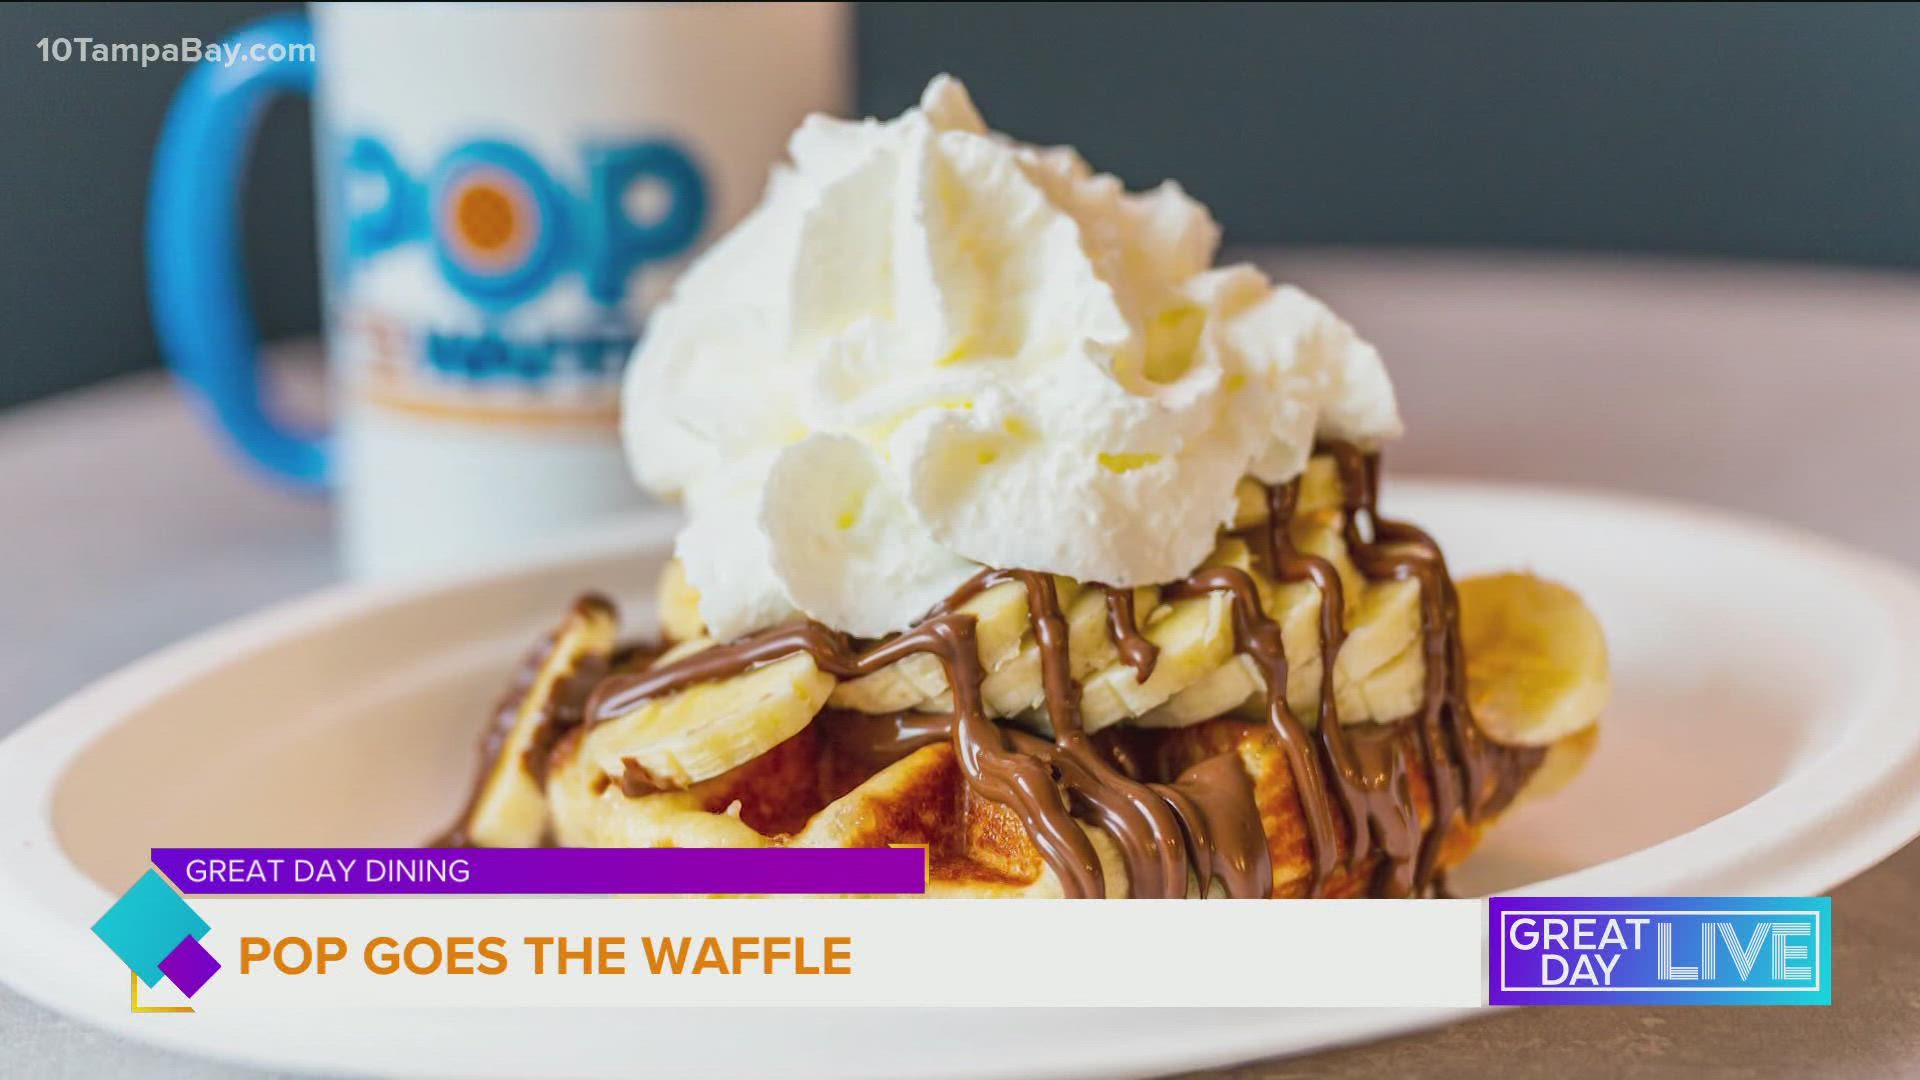 Great Day Dining: Pop Goes The Waffle